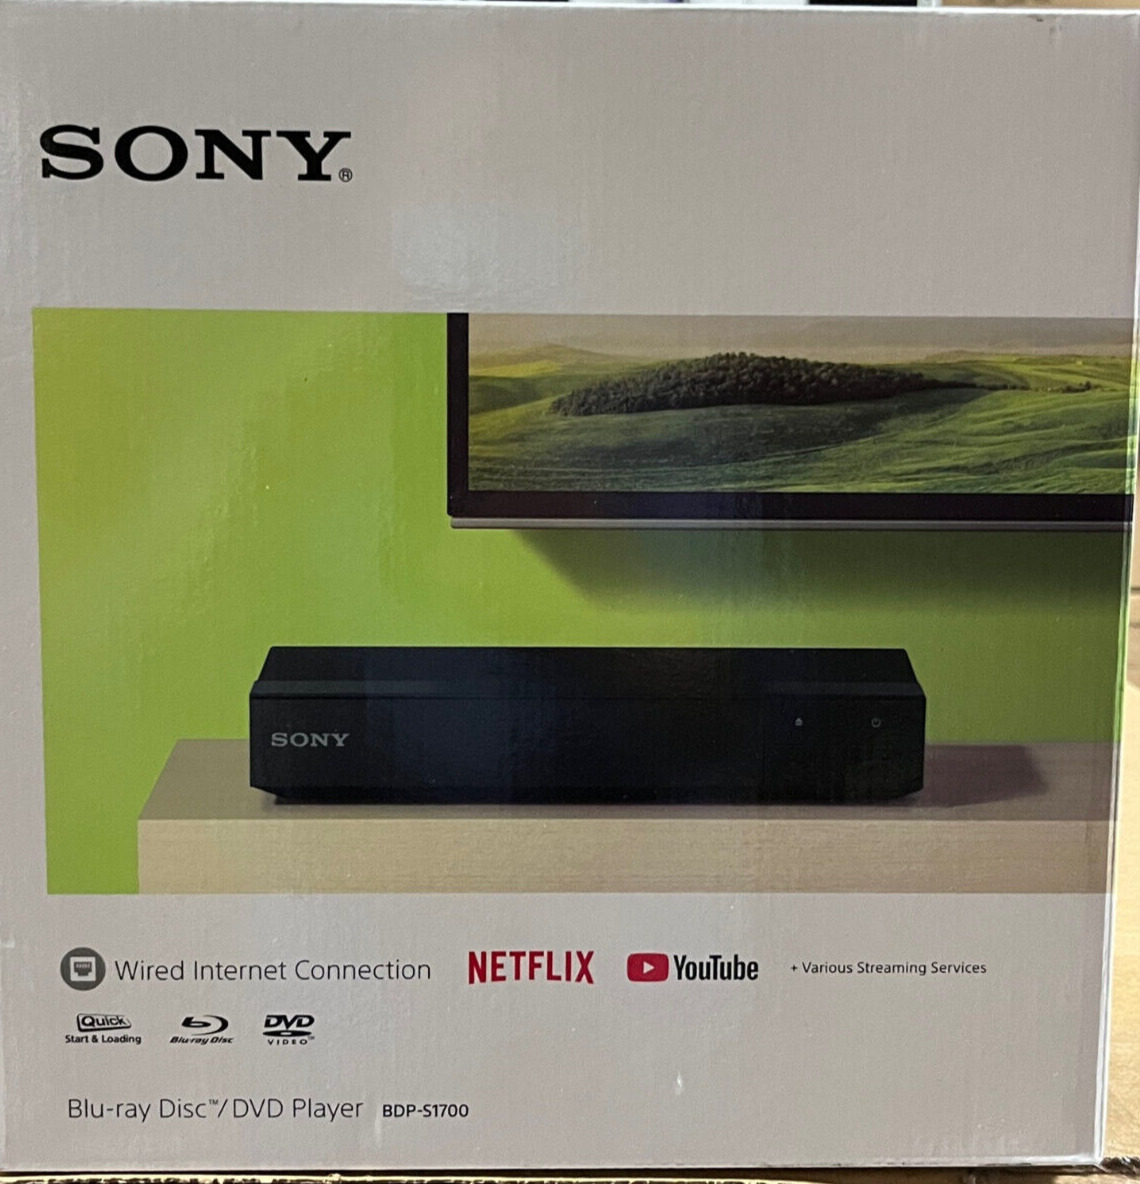 Sony Blu-ray Disc Player, Wired w/ 1080p Playback, Dolby TrueHD - BDP-S1700